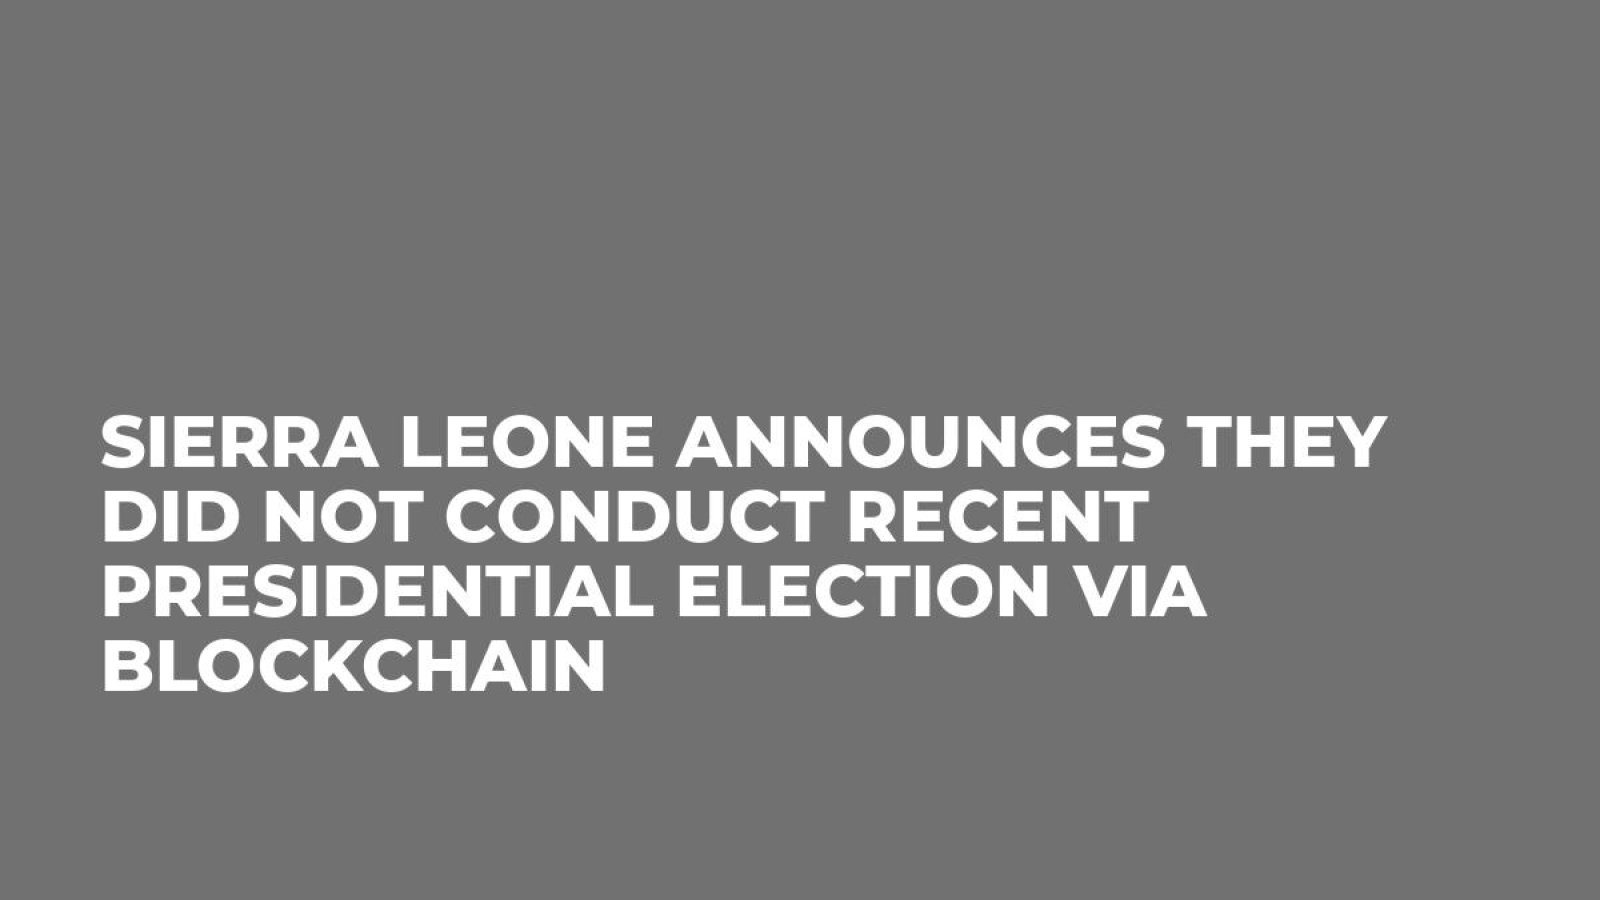 Sierra Leone Announces They Did Not Conduct Recent Presidential Election Via Blockchain